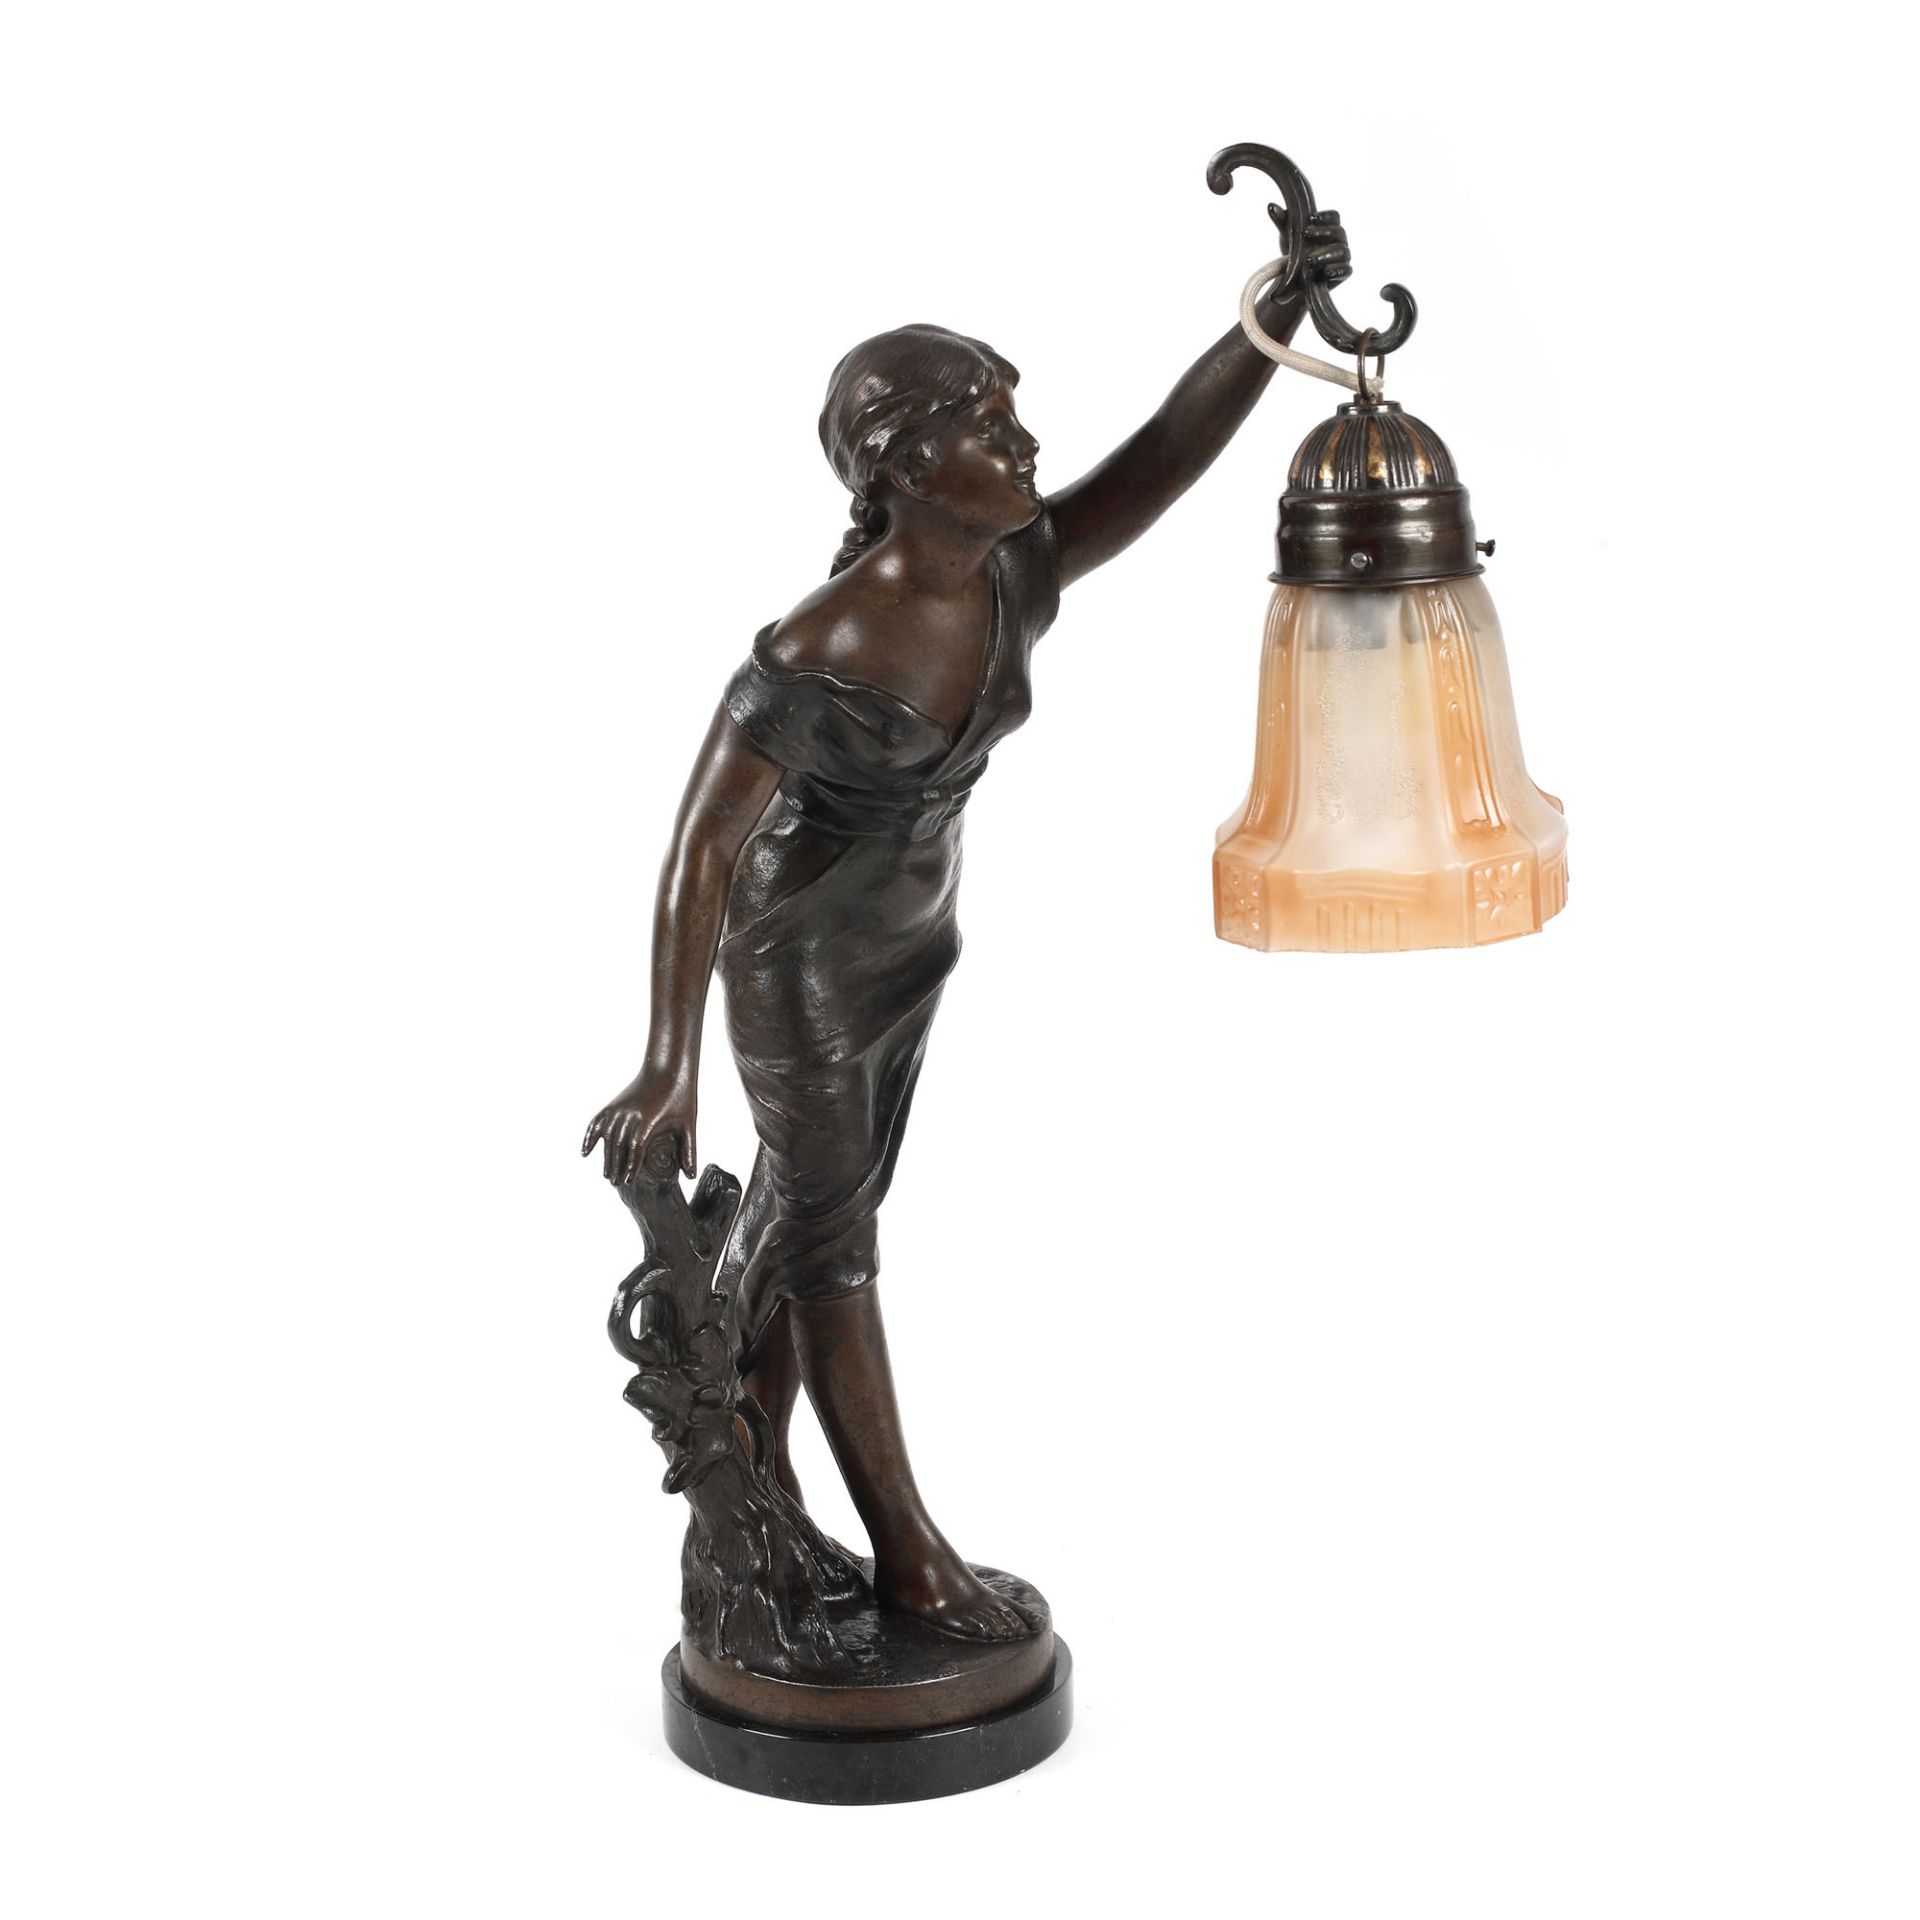 French workshop, Wrought iron lamp, Lalique glass, approx. 1930 - Image 2 of 5